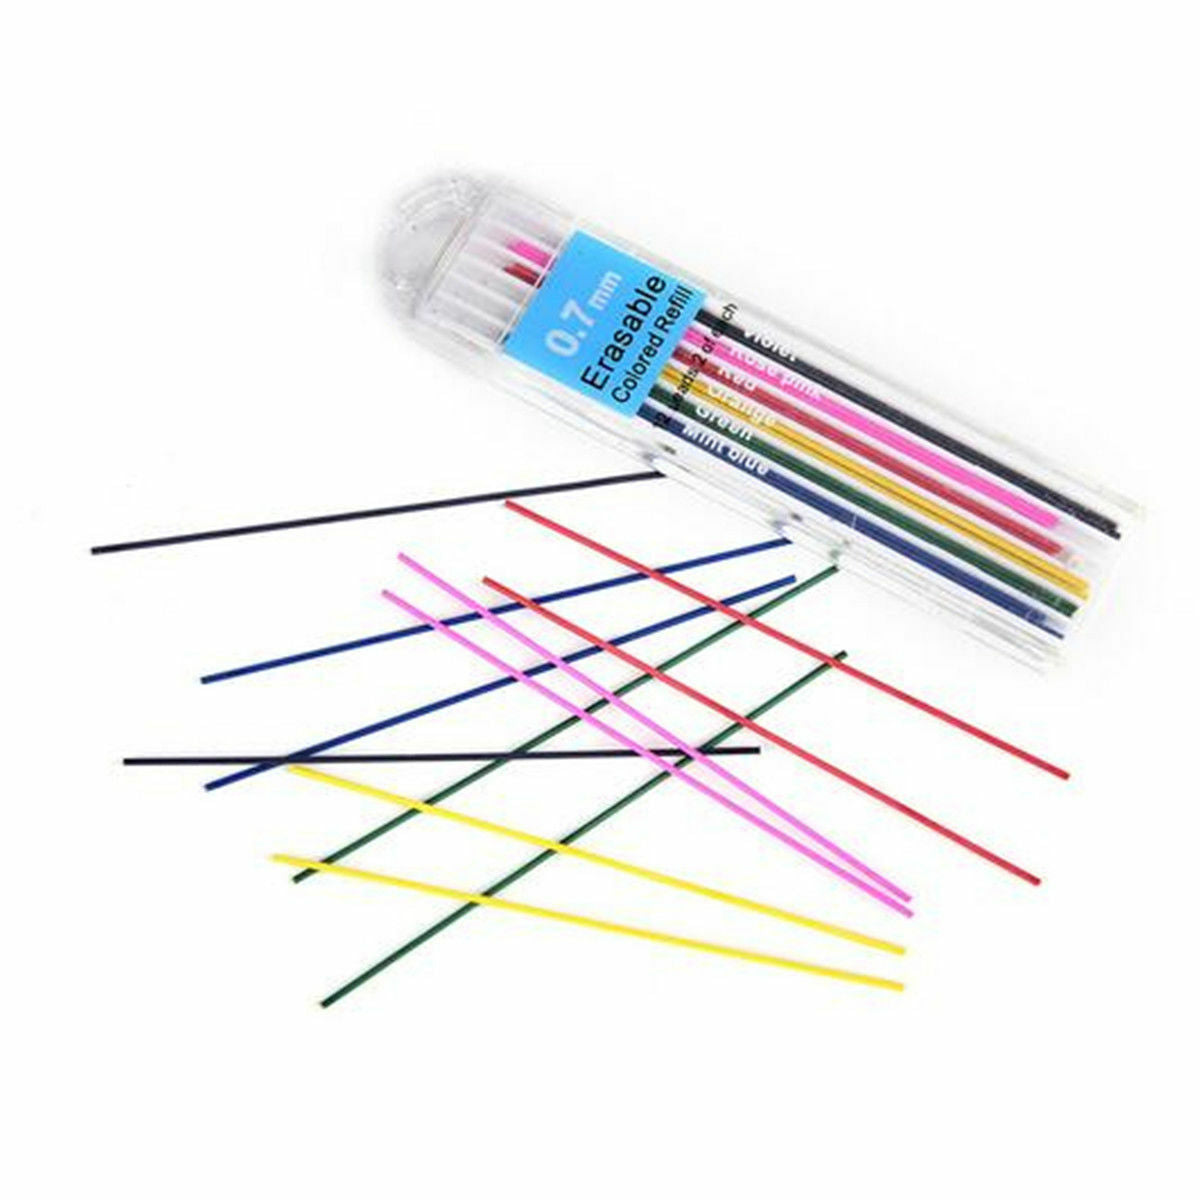 24PCS Automatic Mechanical Pencil Refill 6Color Lead School Stationery 0.7mm